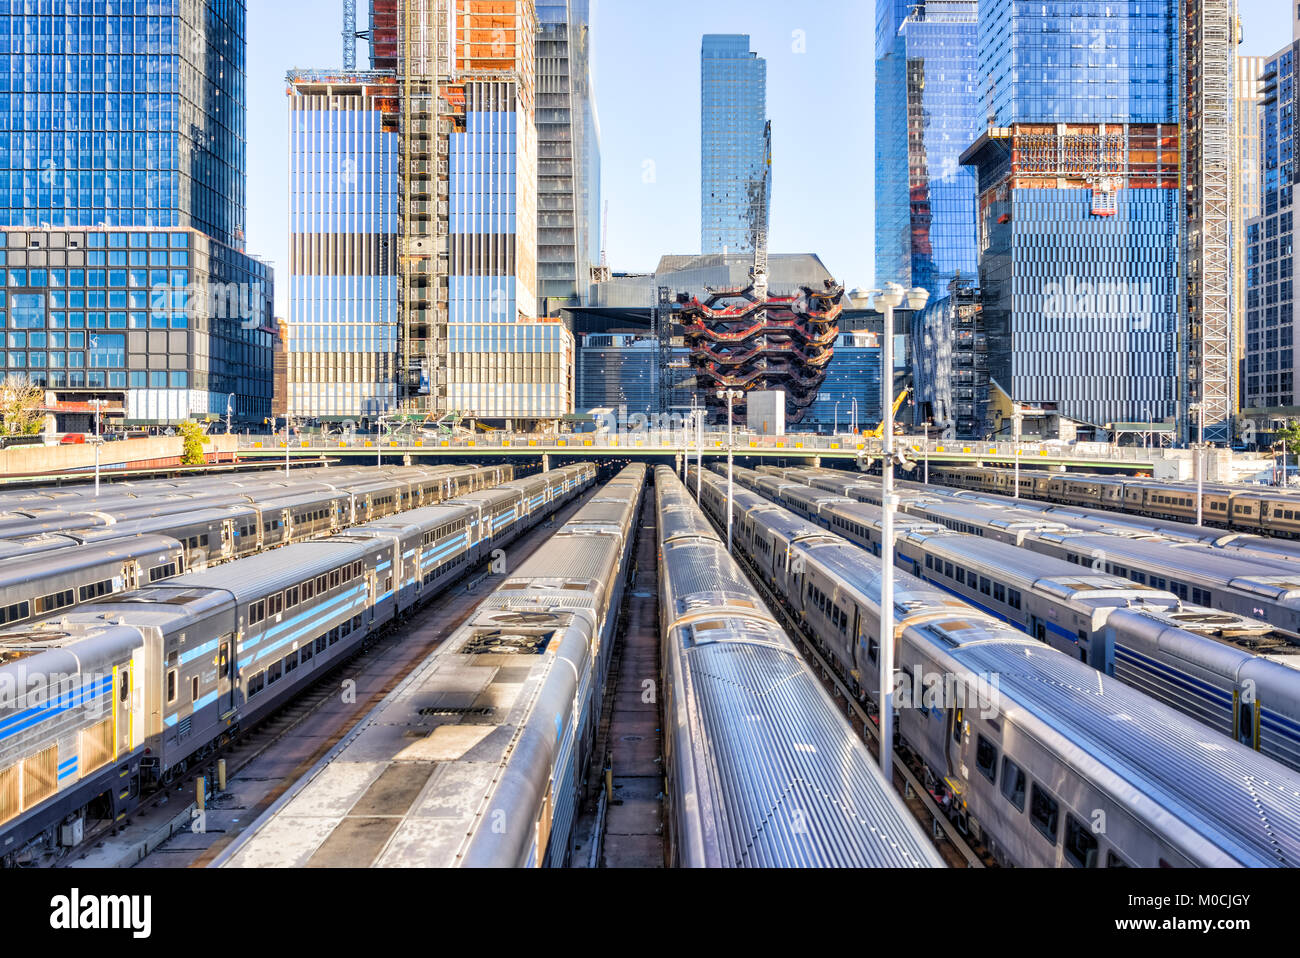 New York City, USA - October 27, 2017: Aerial view of Hudson Yards train depot, building development, High Line, NYC Stock Photo